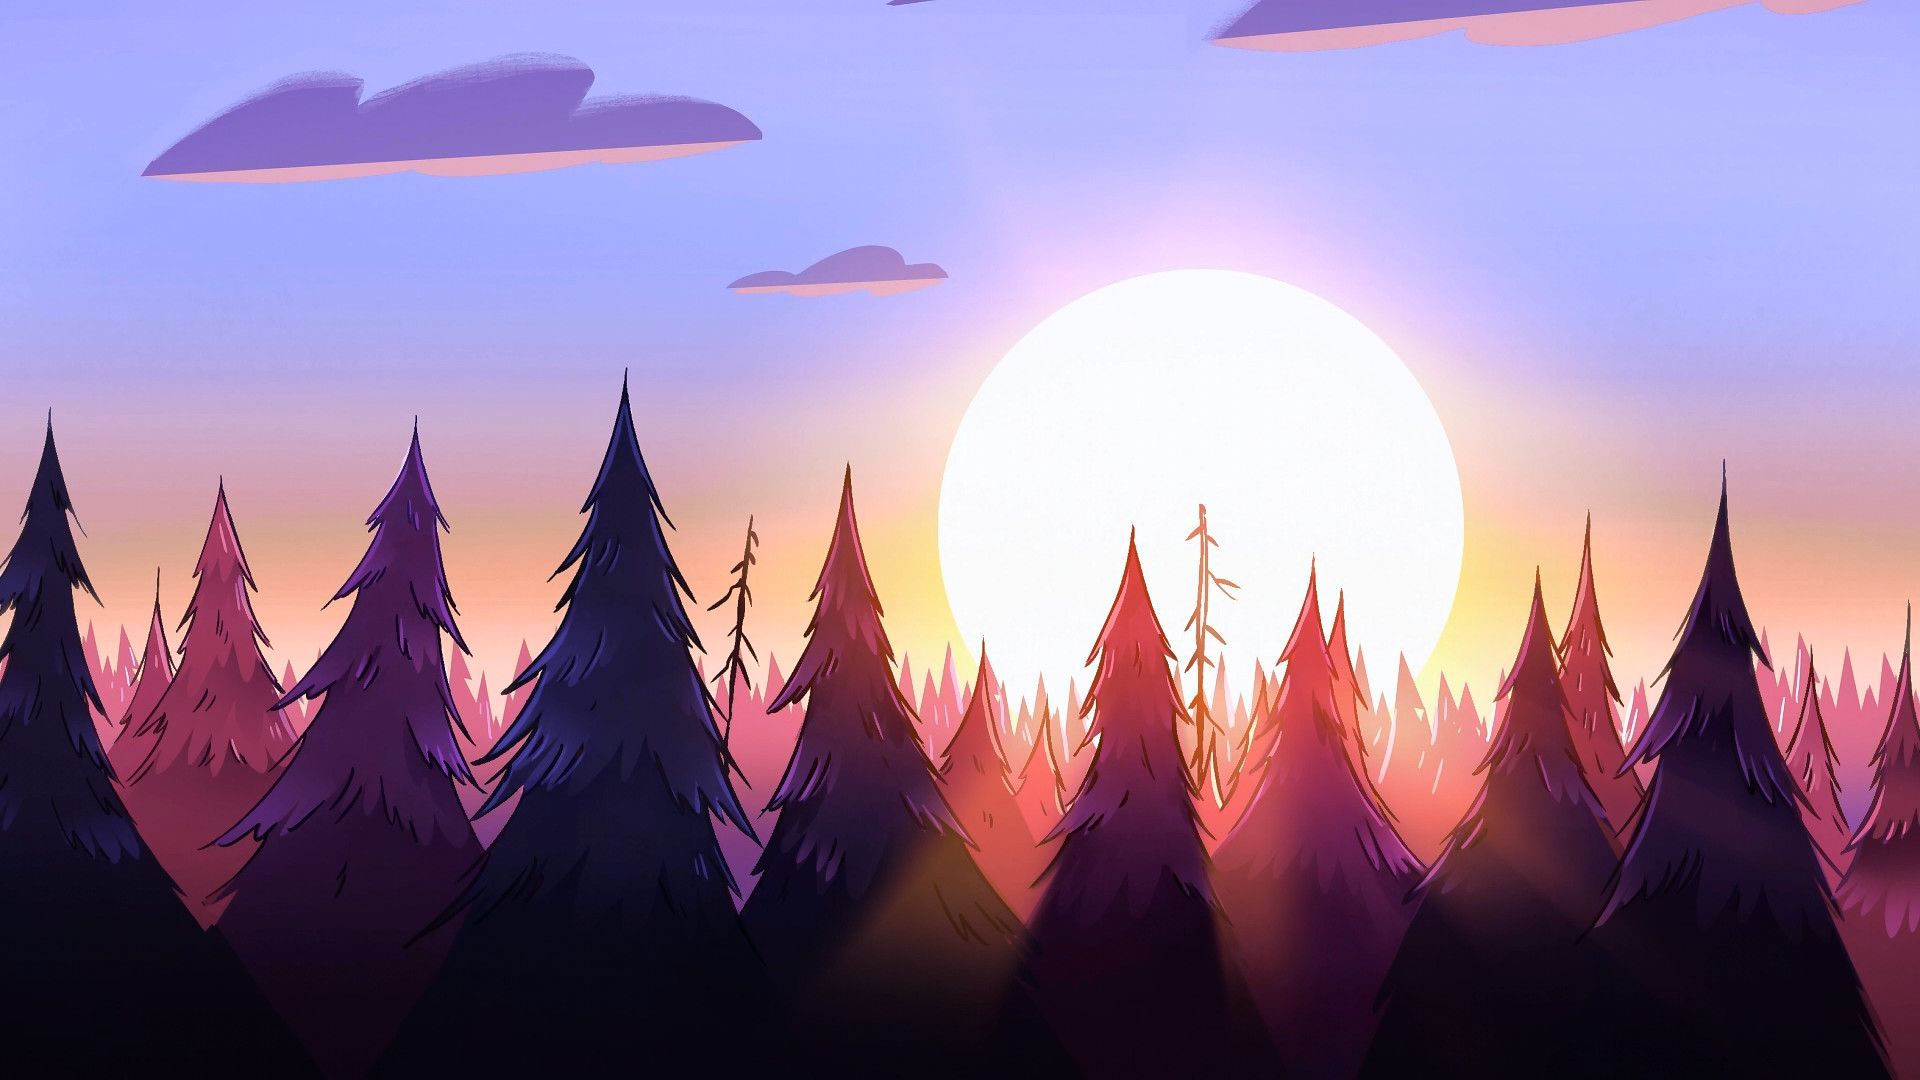 A wallpaper of a sunset over a forest of trees - 1920x1080